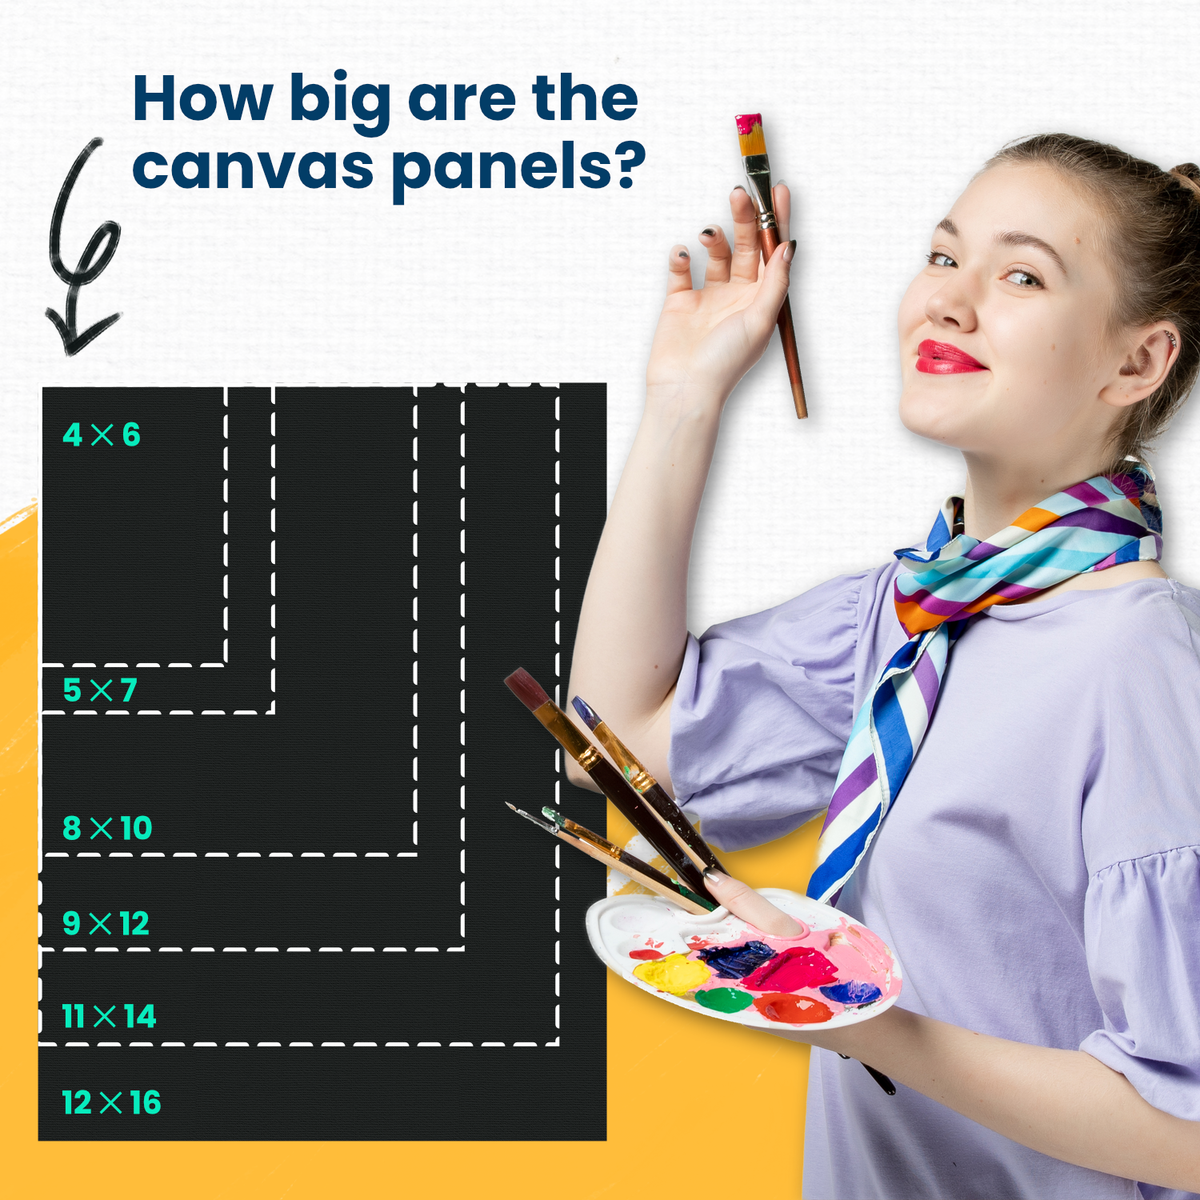 Painting Canvas Panels | 4x6, 5x7, 8x10, 9x12, 11x14, 12x16 inch (4 Each, 24 Pack)